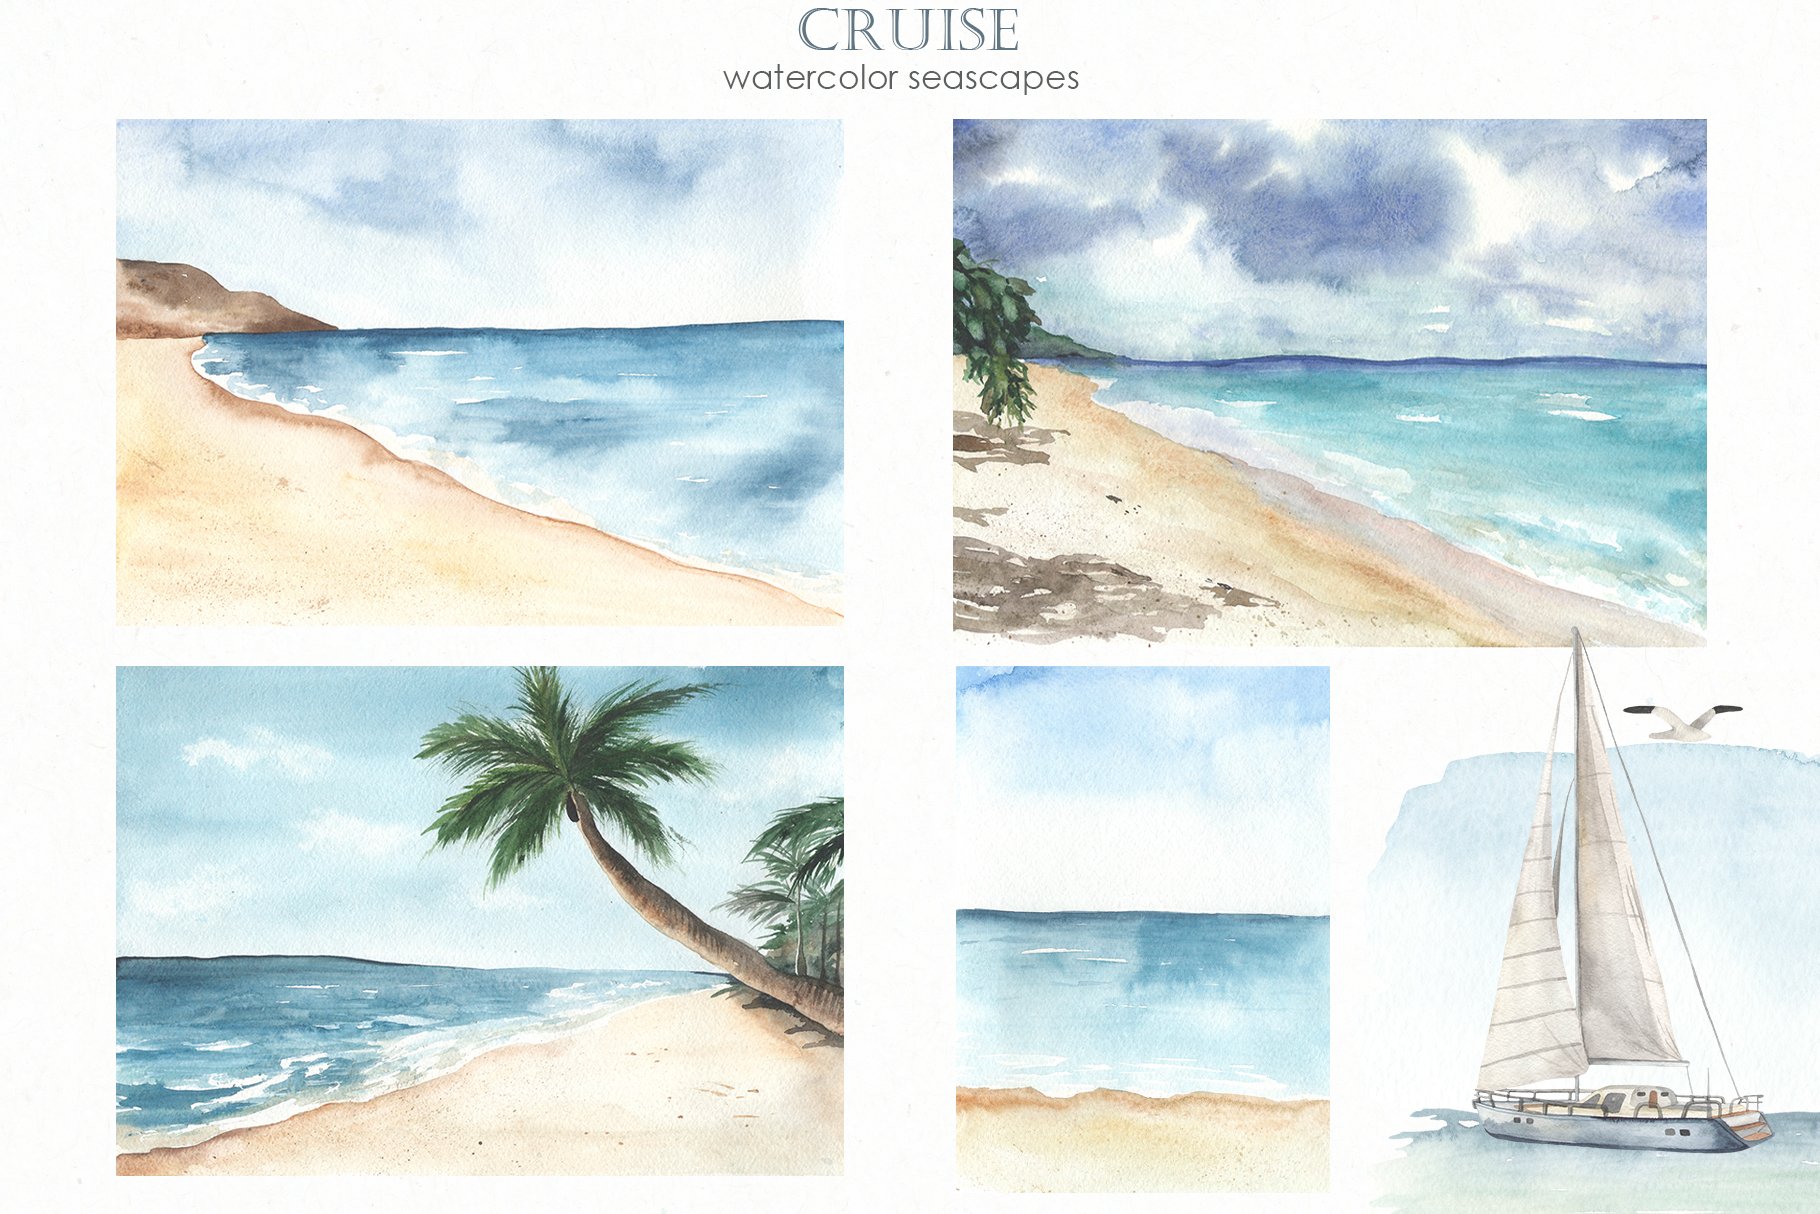 Watercolor sea cruise watercolor seascapes for your ideas.